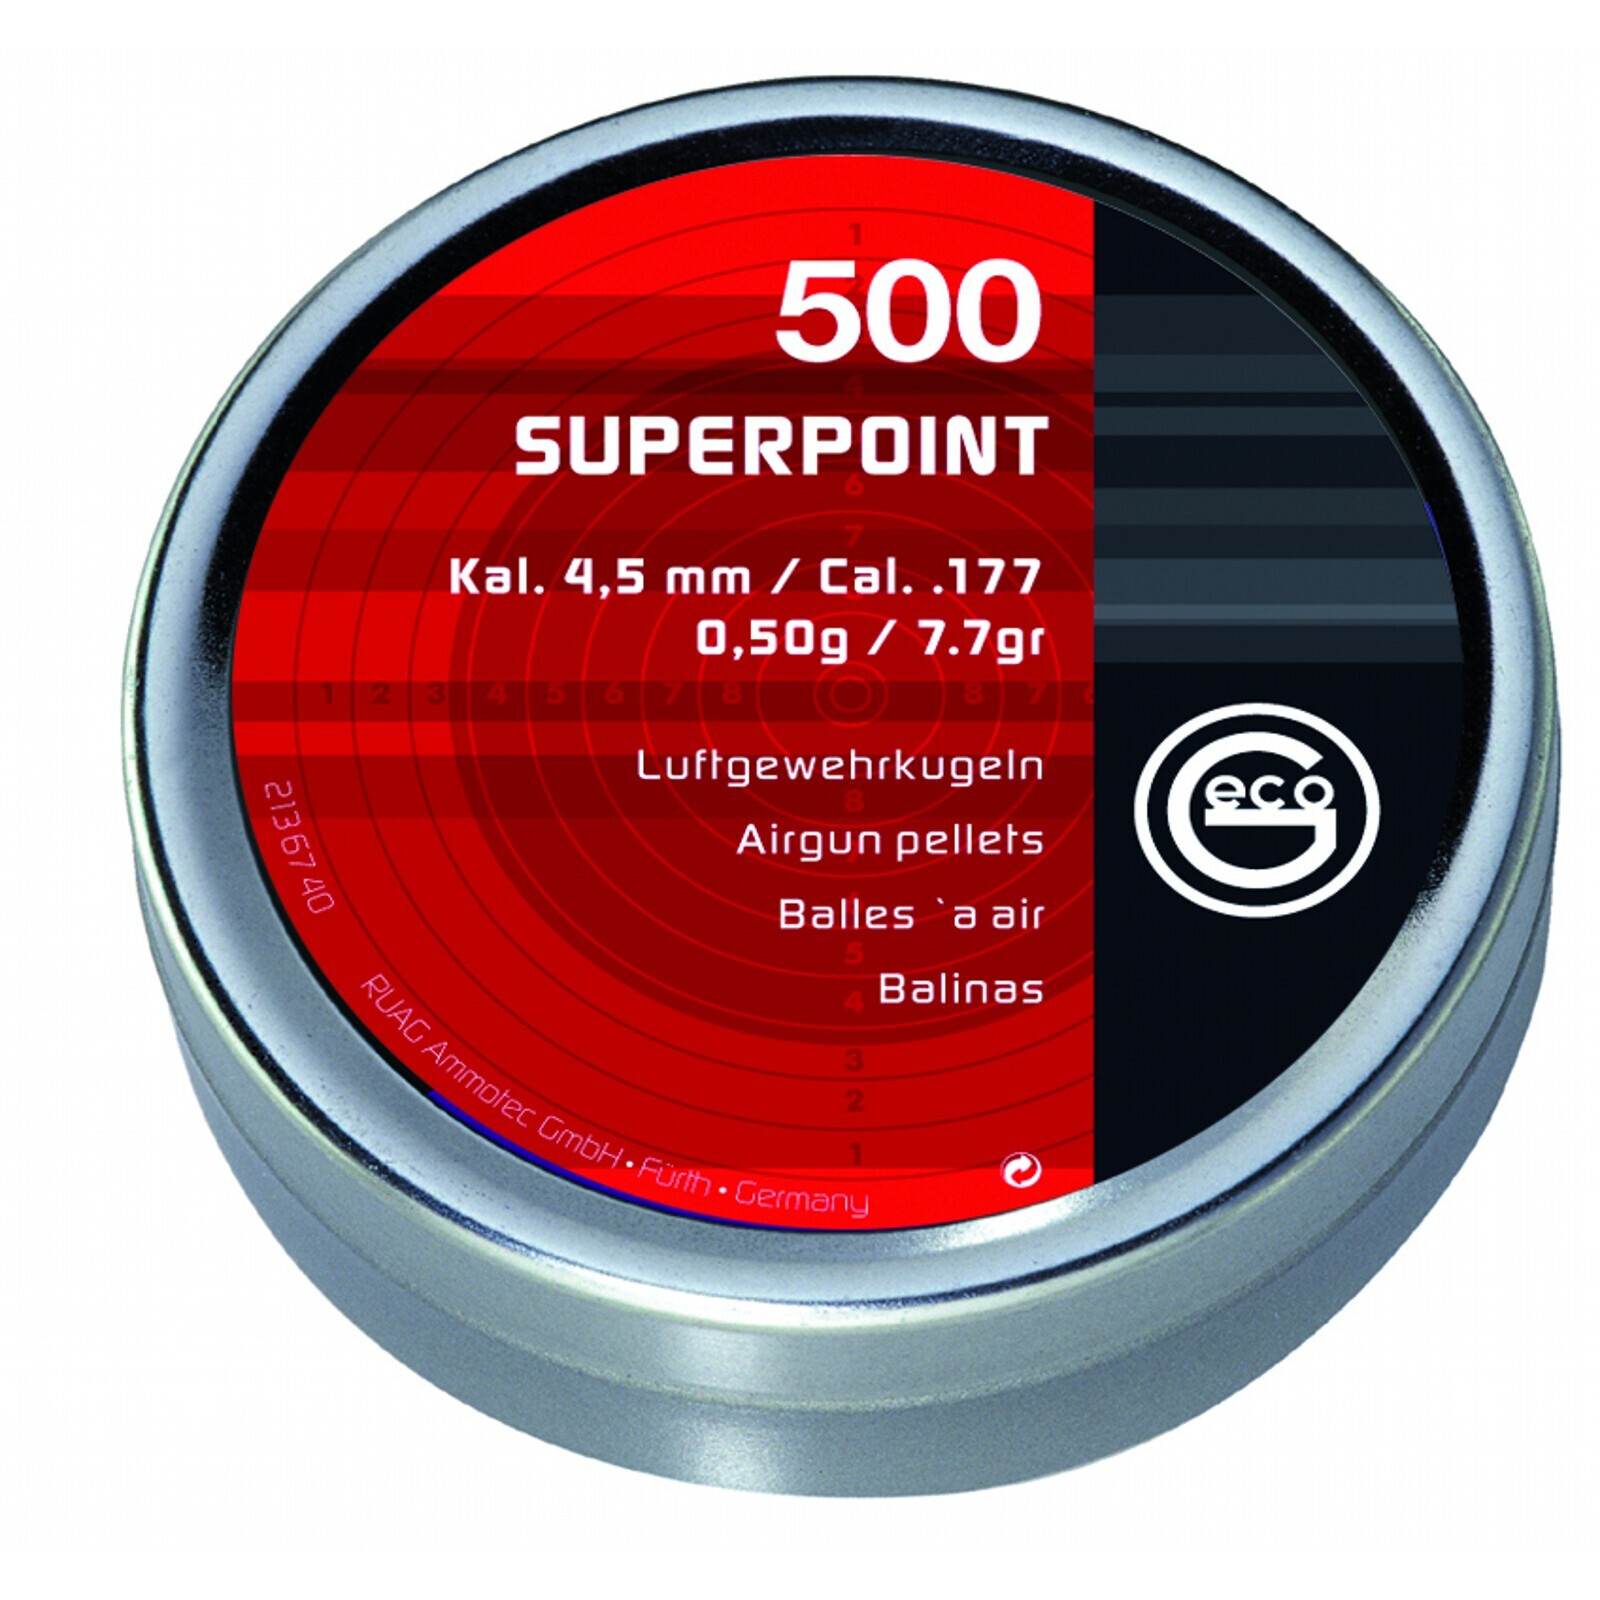 GECO Superpoint - Kal. 4,5 mm - 0,50g - 500 Stck.